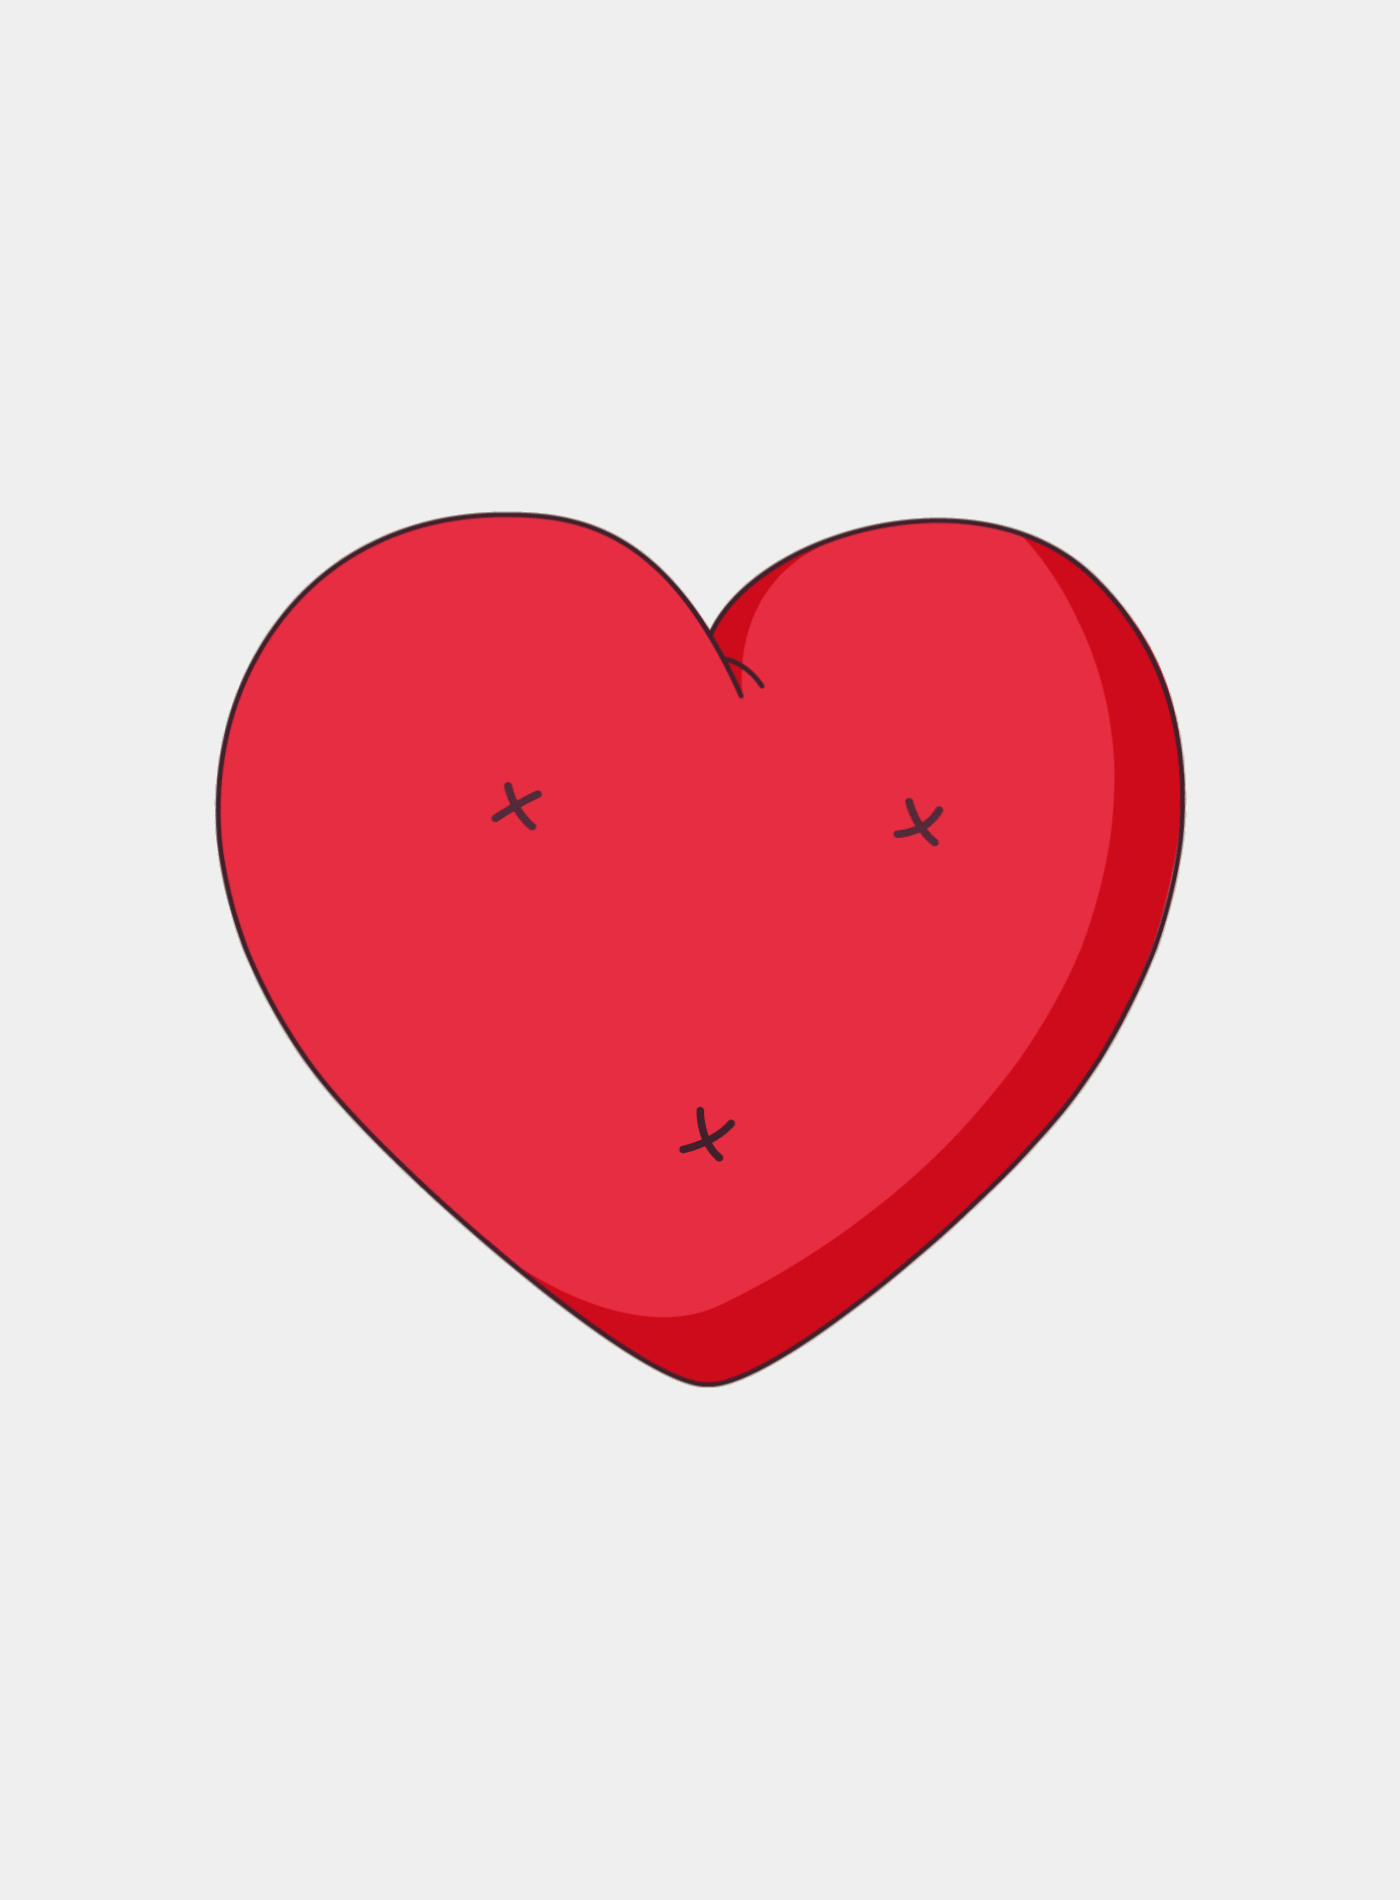 Gifs Heart 150 Pcs Of Animated Images Of Hearts For Lovers